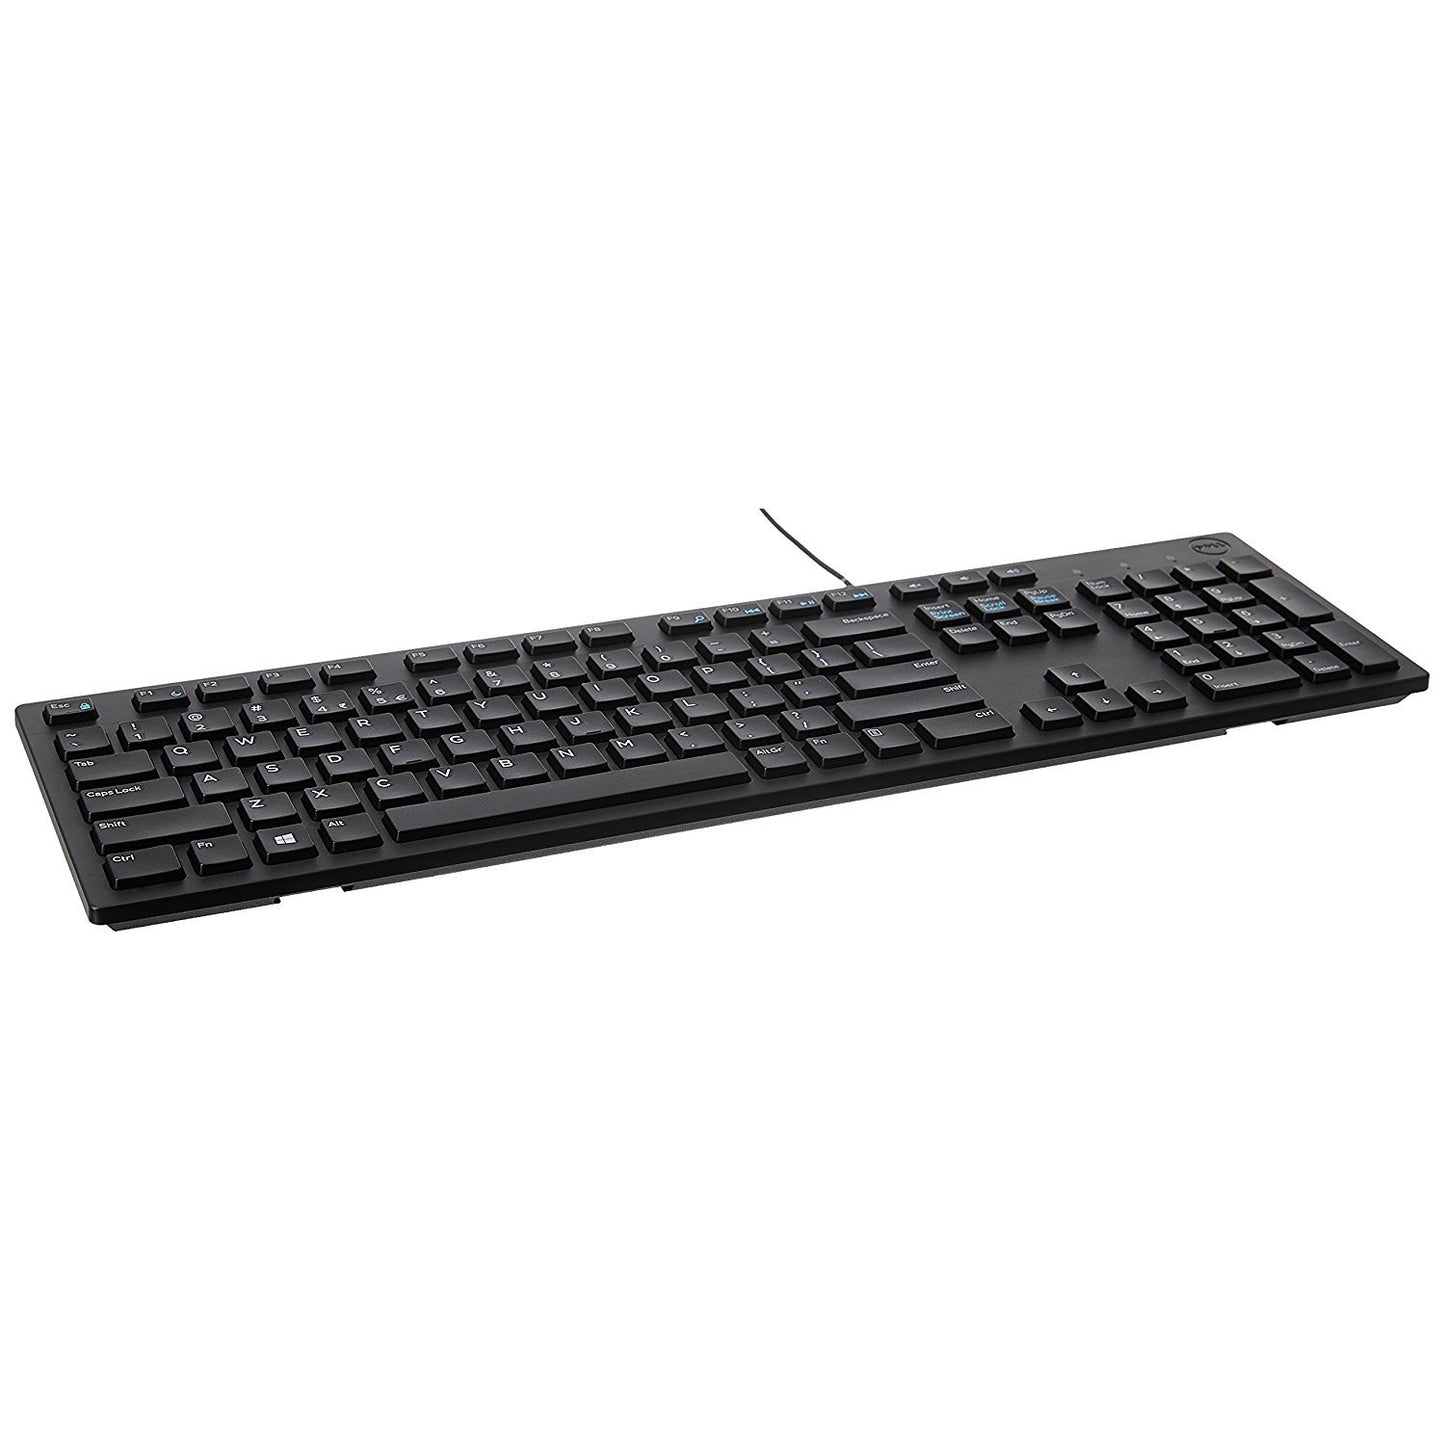 Dell KB216/KB216d1 Multimedia USB Keyboard with Super Quite Plunger Keys with Spill-Resistant Wired Keybaord Black